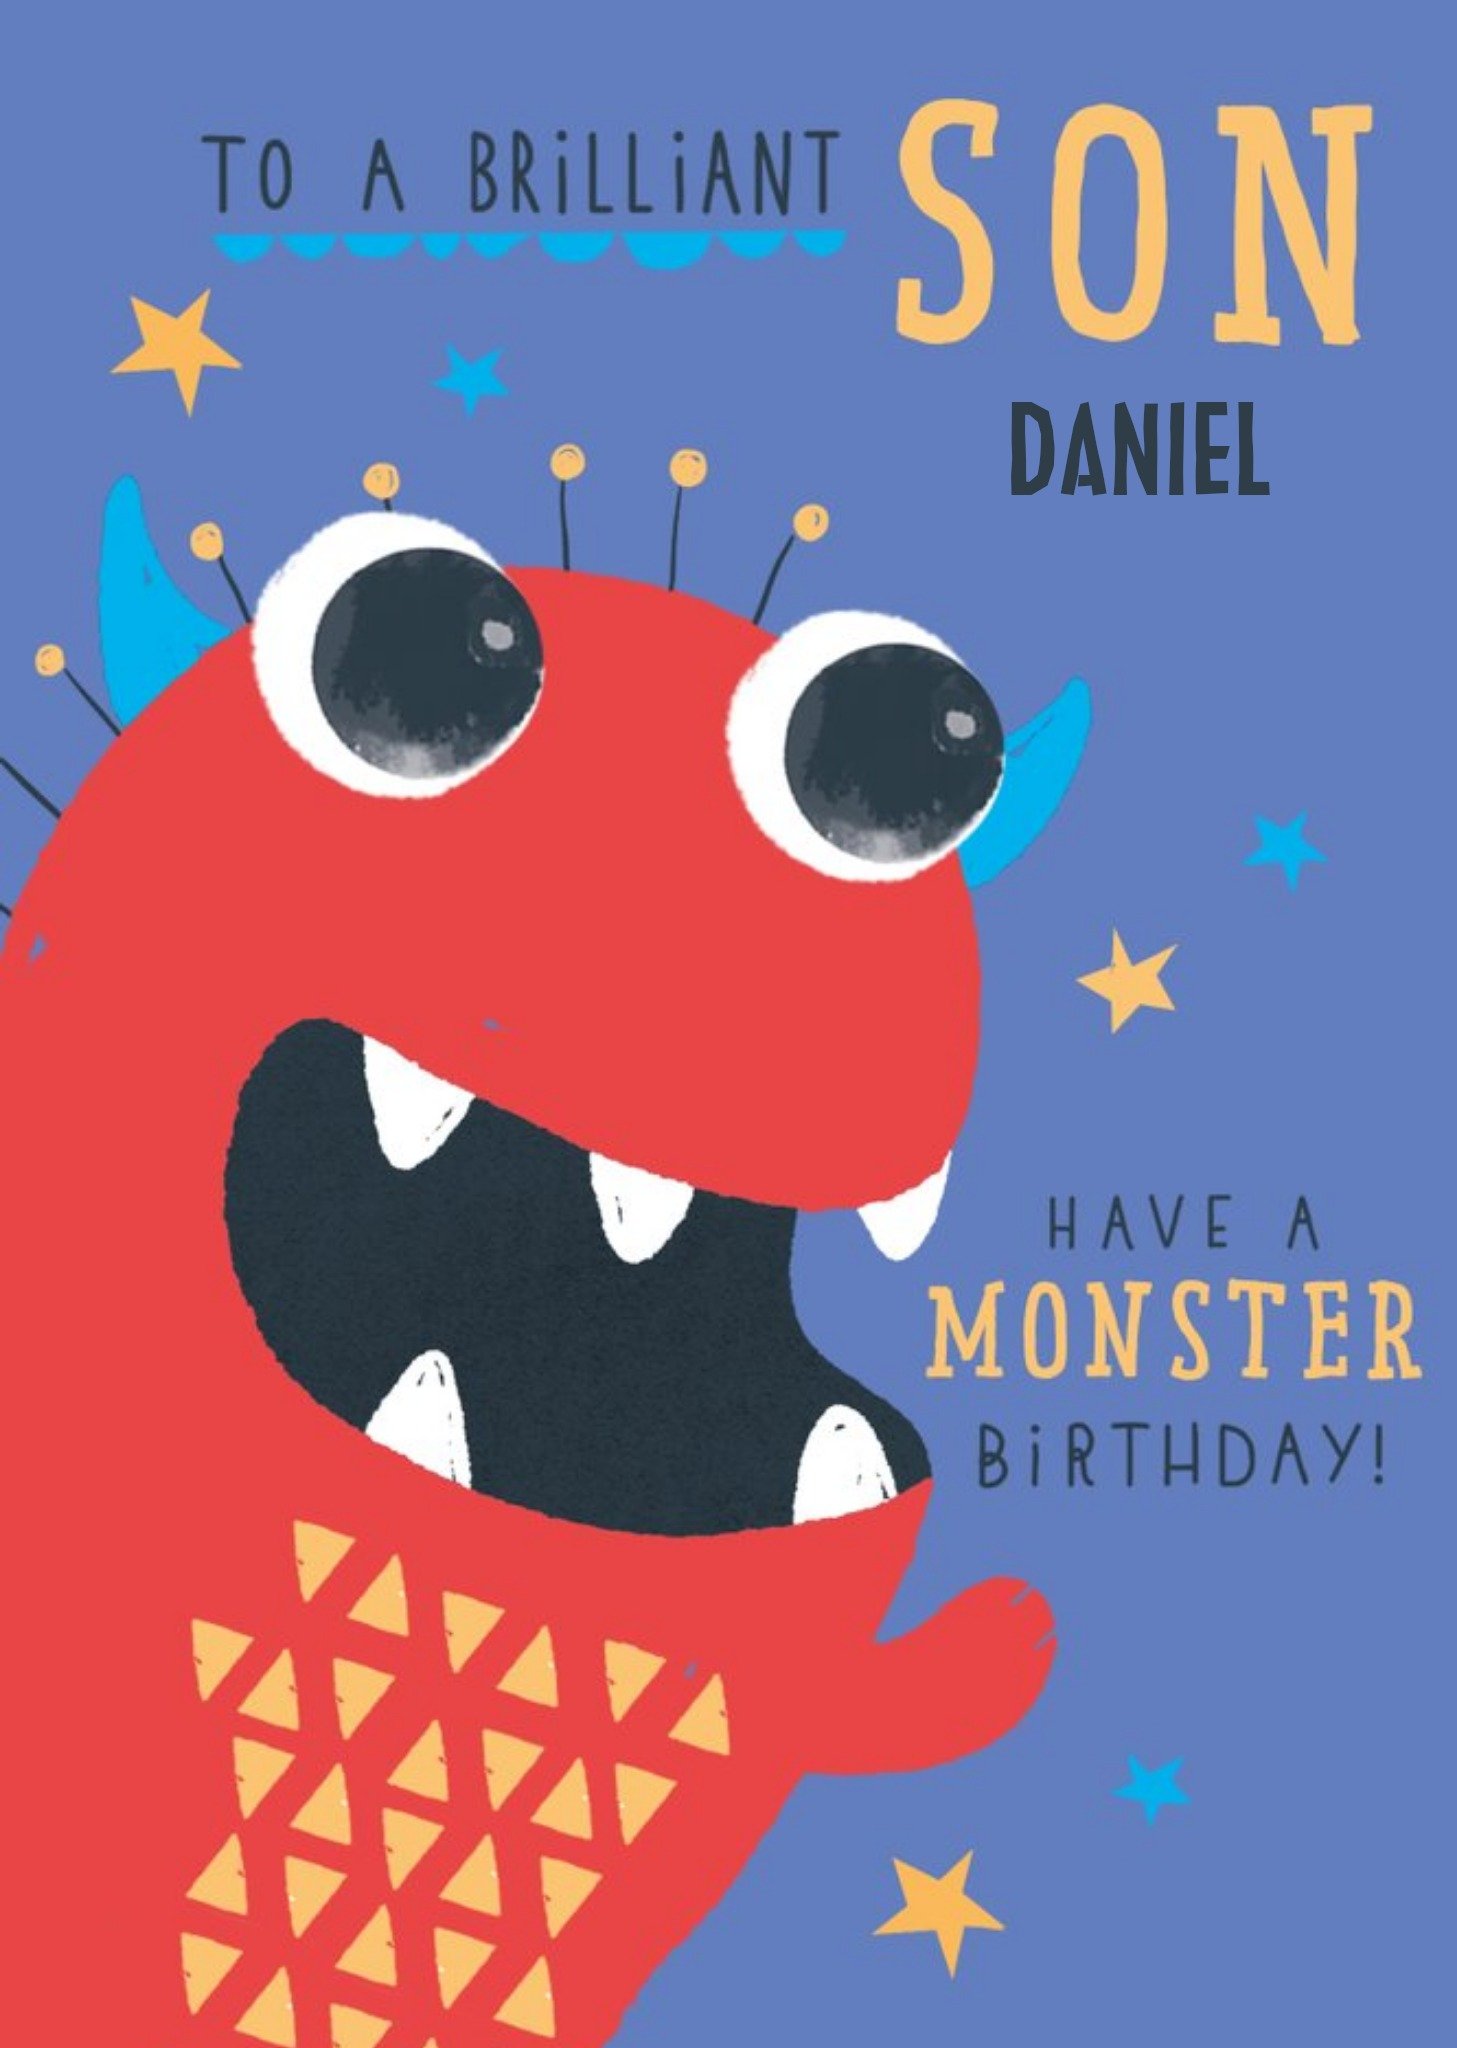 Moonpig Illustration Of A Colourful Monster Son's Birthday Card, Large